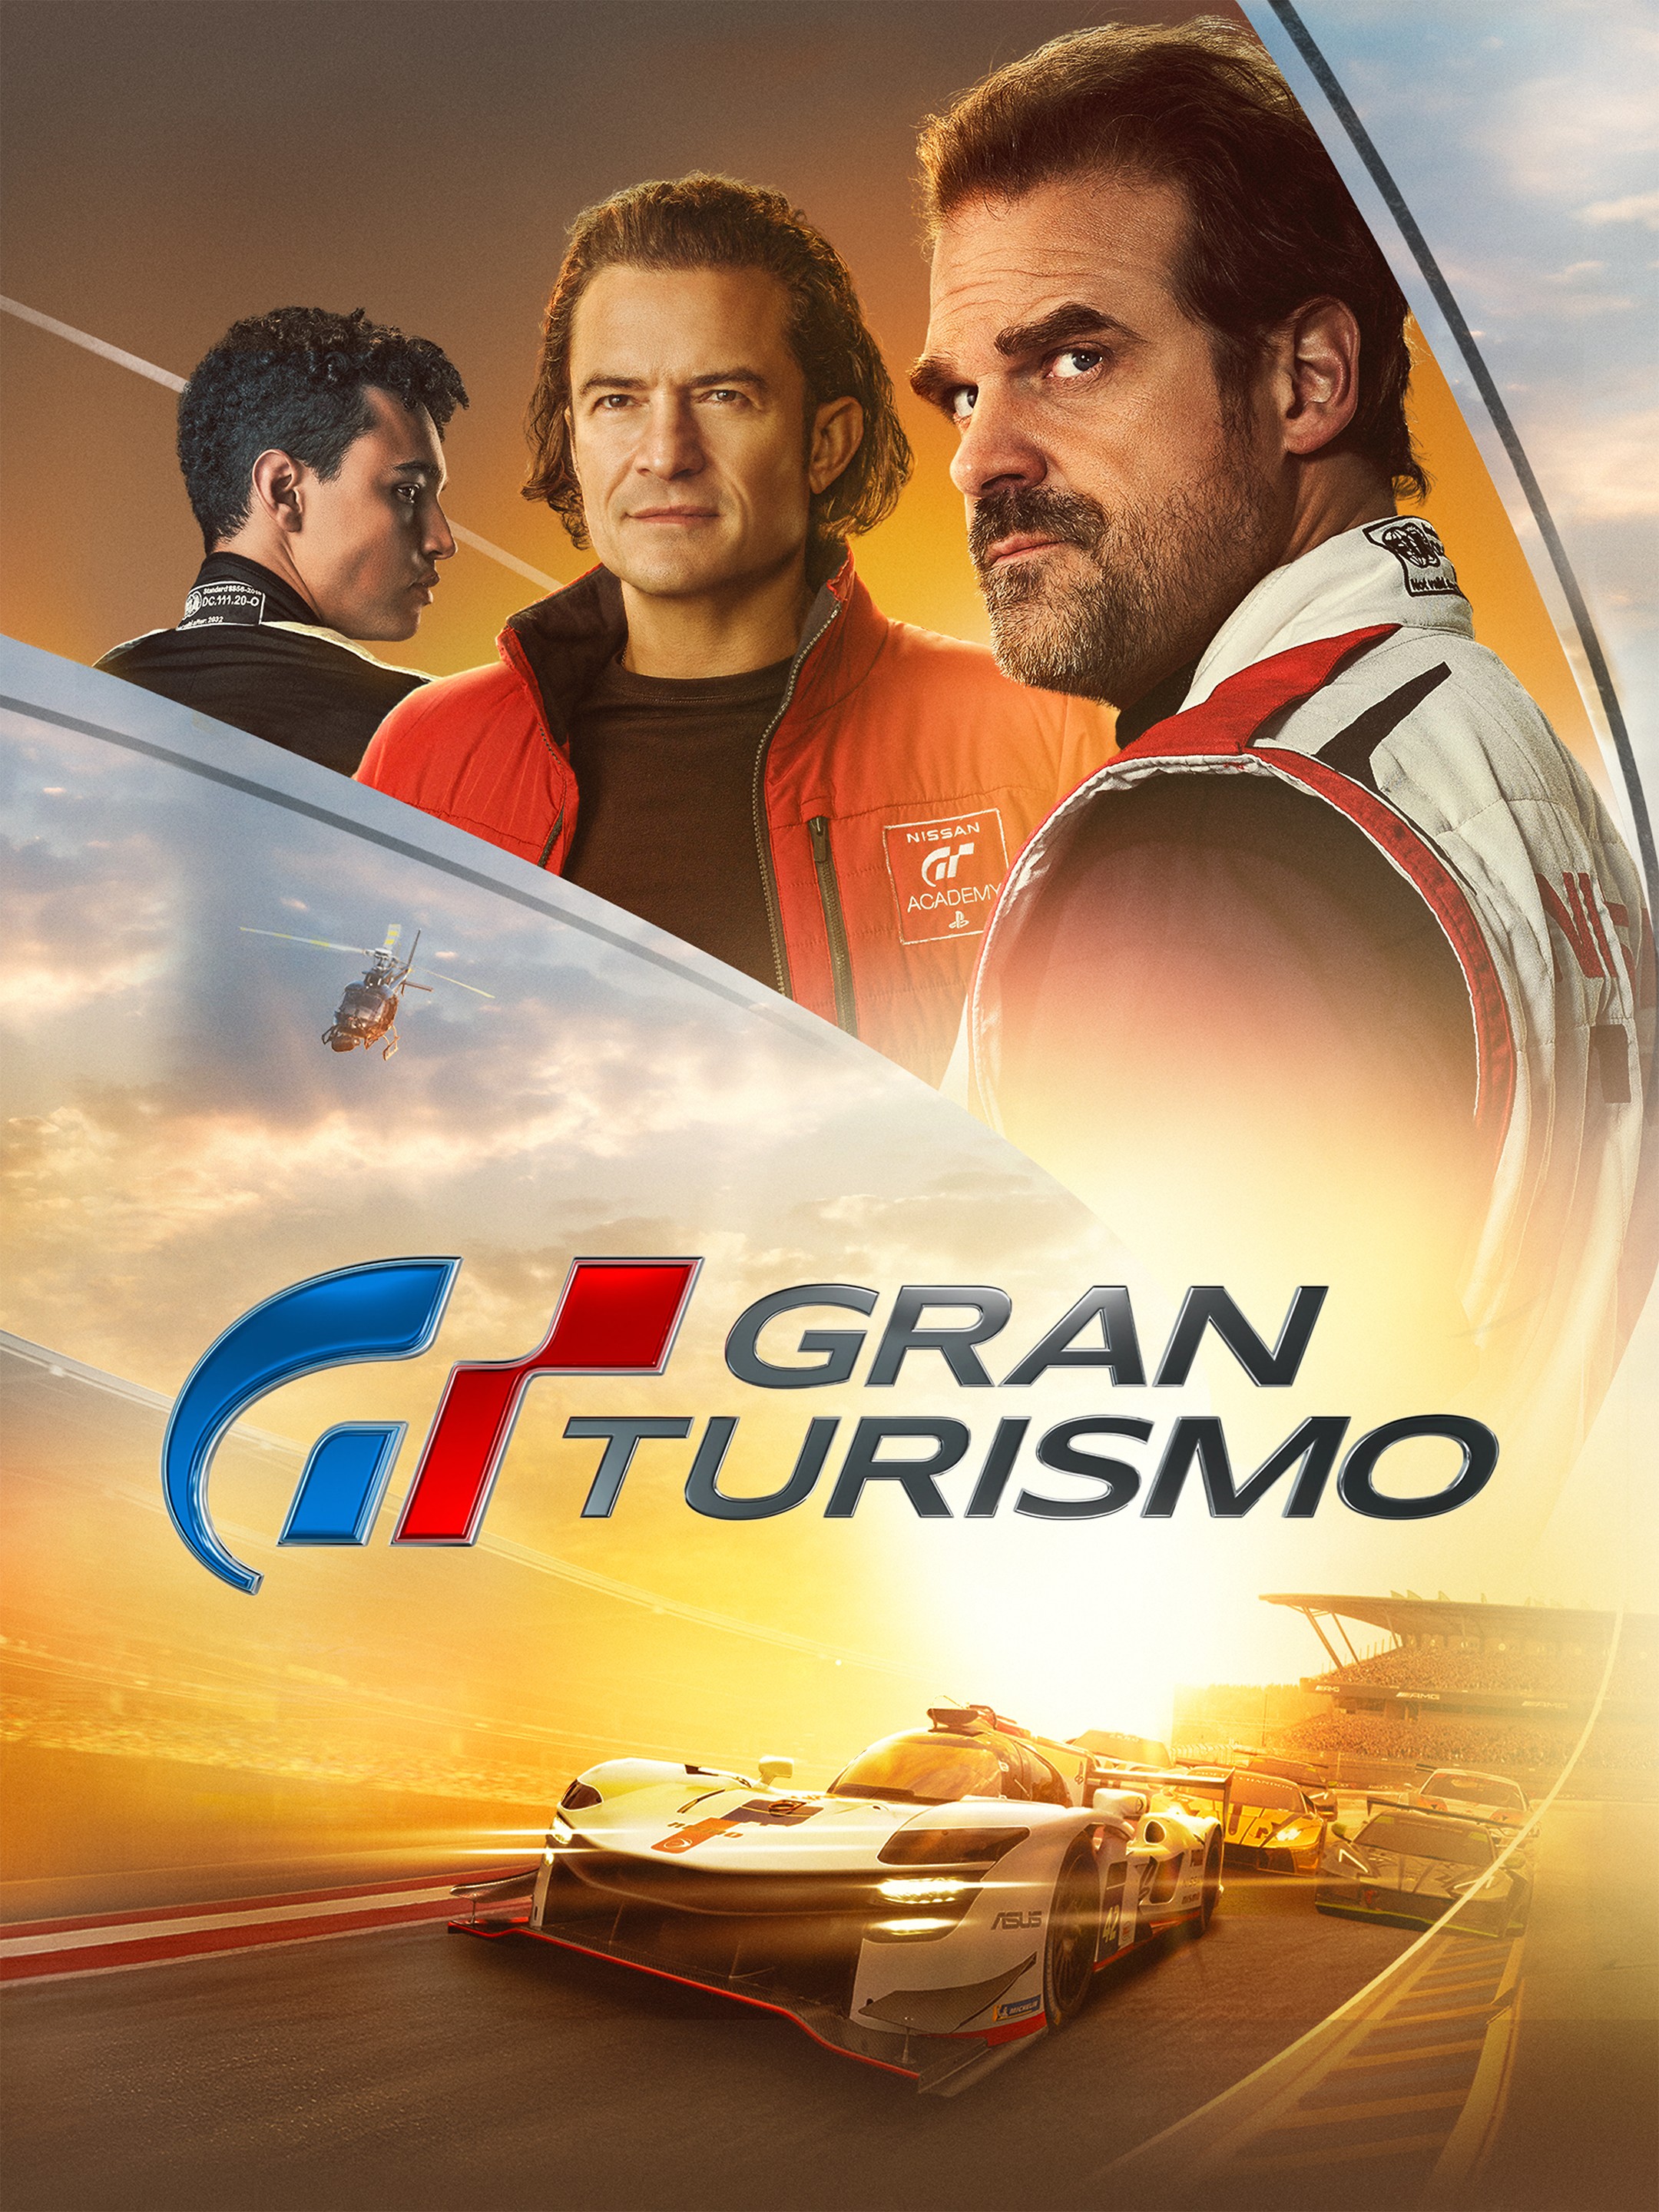 Gran Turismo: Based on a True Story Critic Reviews